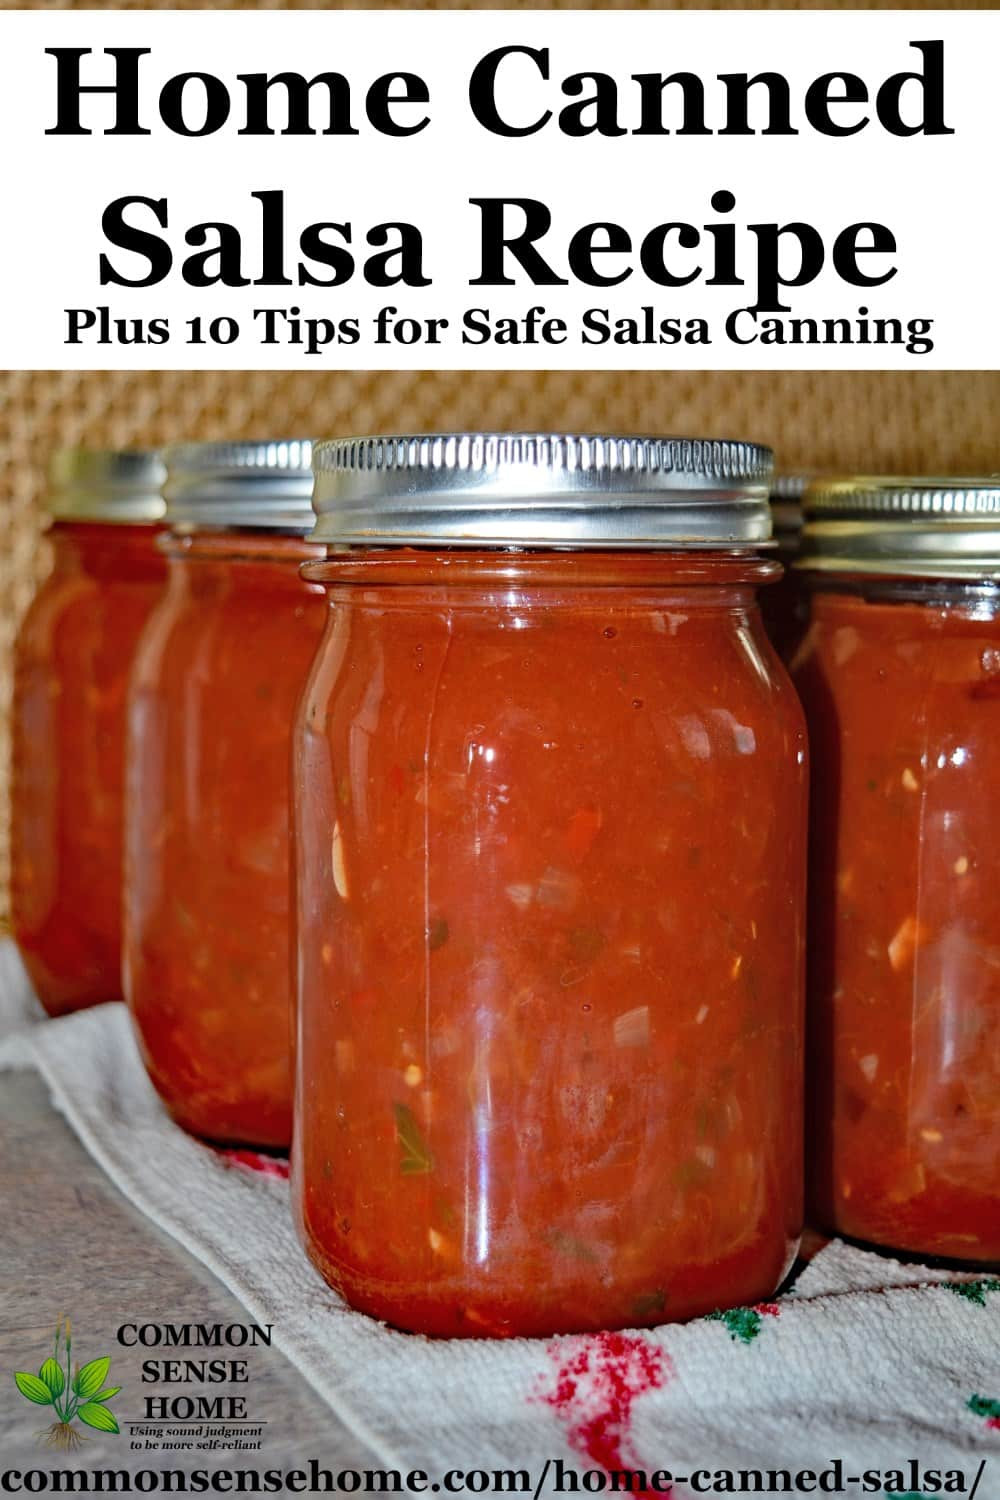 Homemade Salsa Recipe For Canning
 Home Canned Salsa Recipe Plus 10 Tips for Canning Salsa